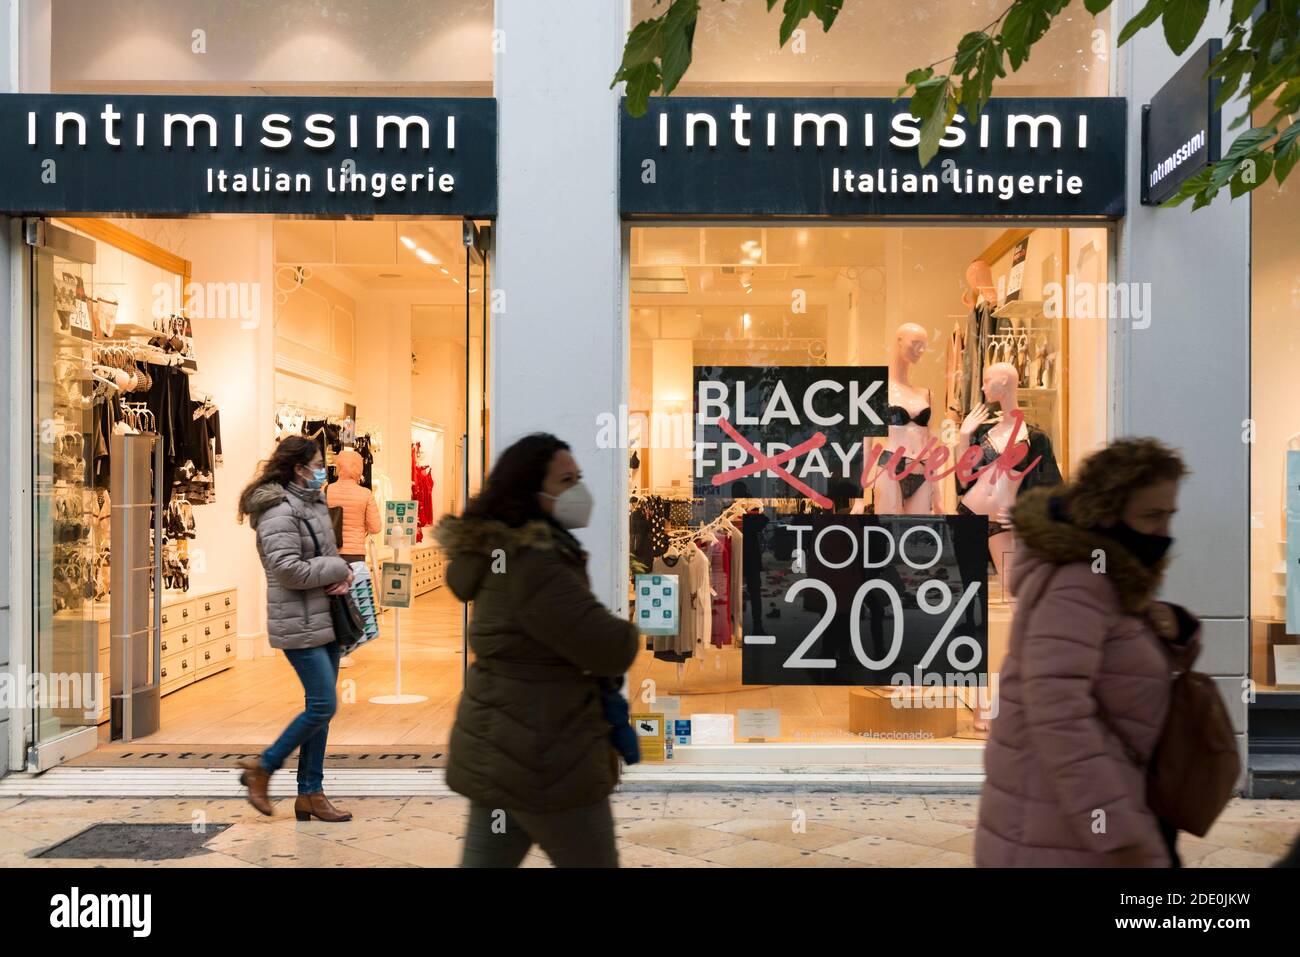 Valencia, Spain. 27th Nov, 2020. People wearing face masks as a precaution  against the spread of covid-19 walking past an advertising banner of Black  Friday in front of the Intimissimi shop during